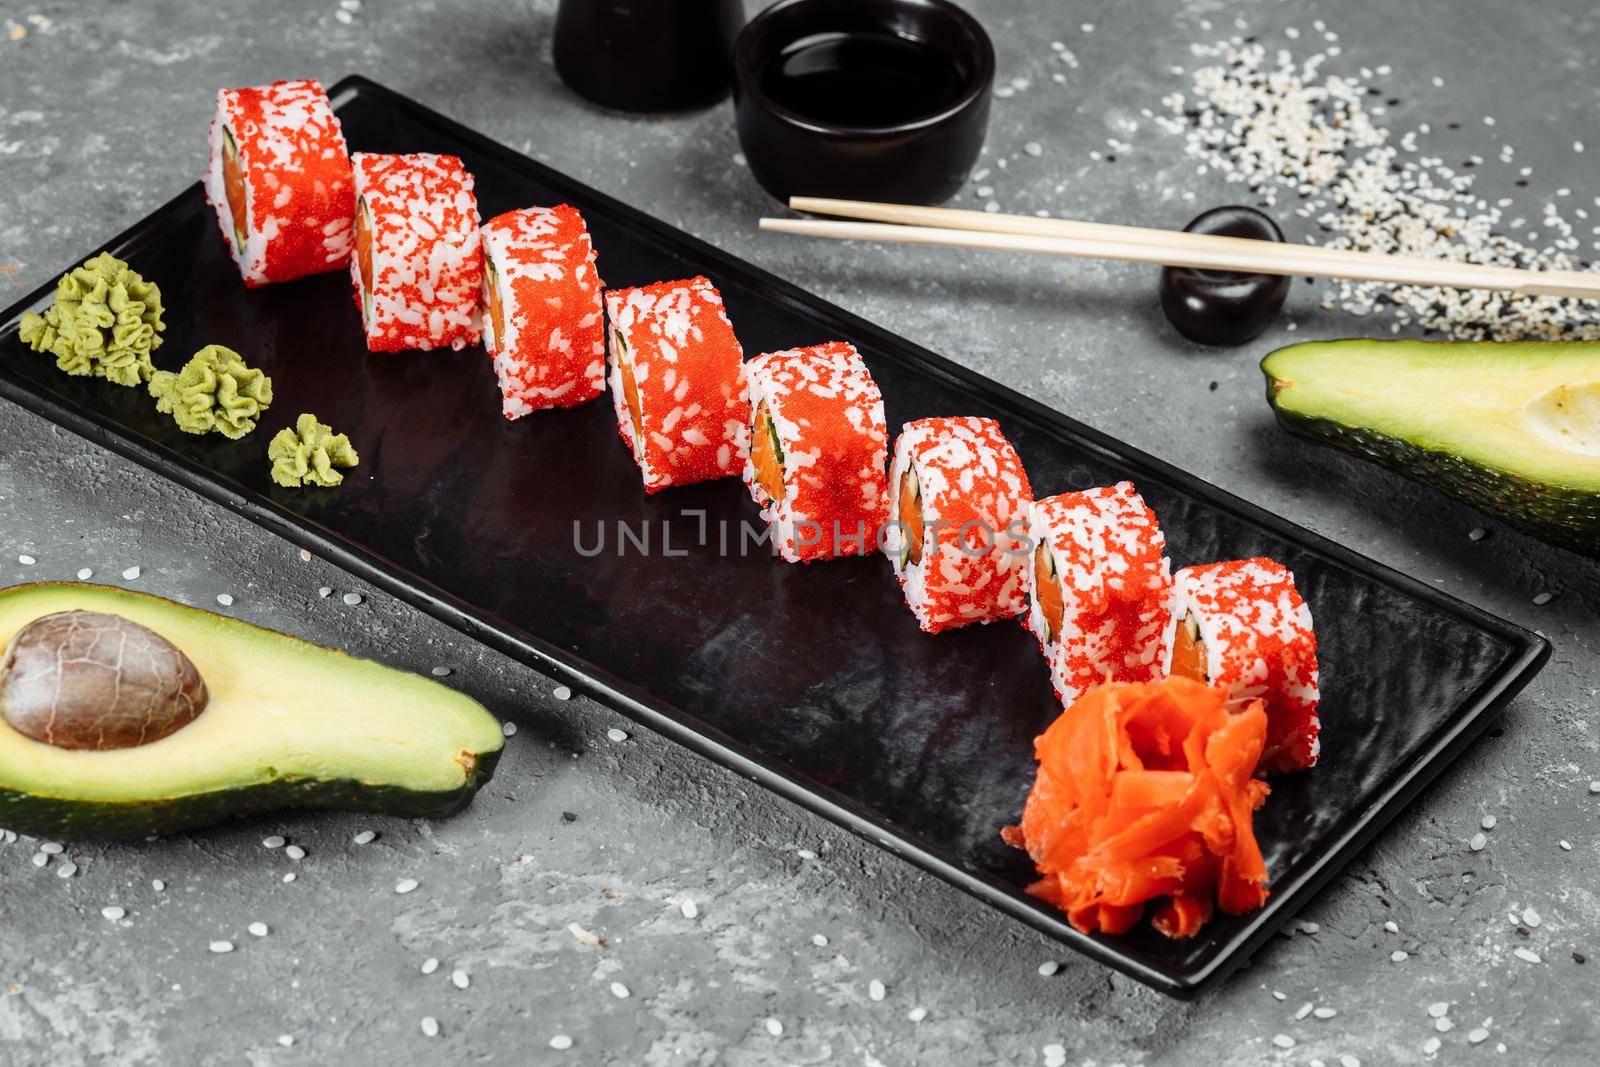 California sushi style rolls, with raw vegetables, food border background.